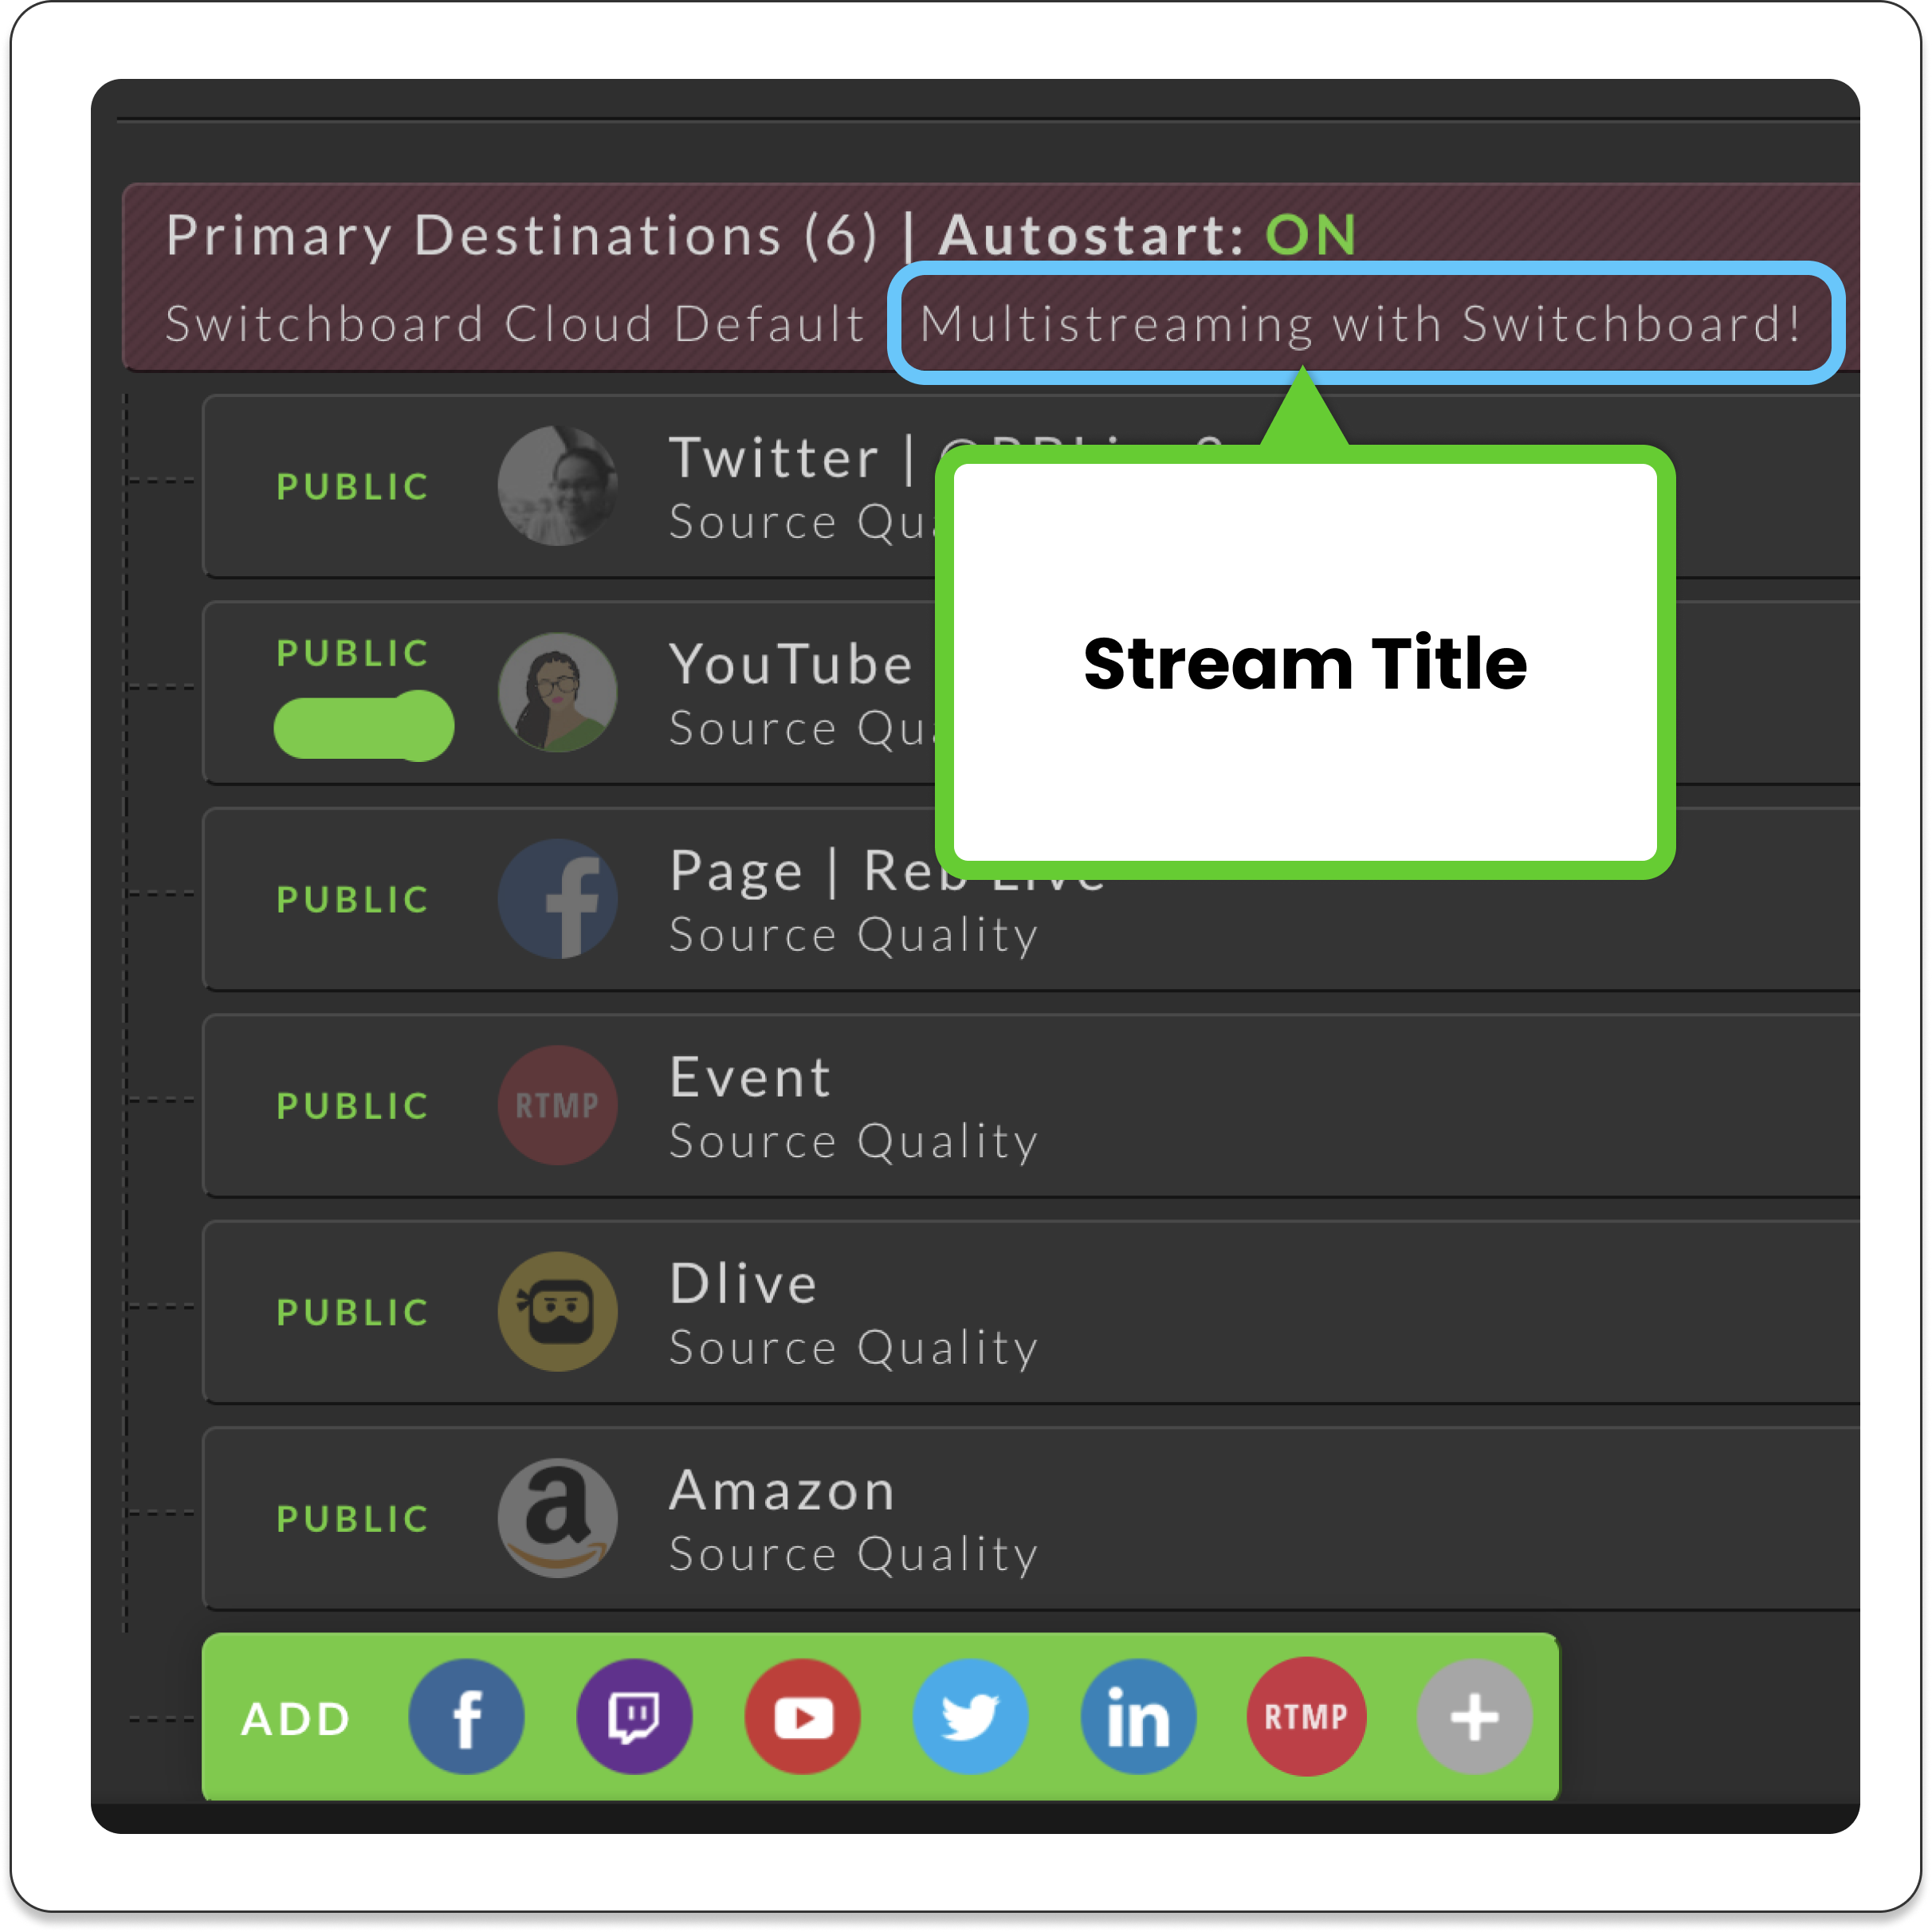 switchboardlive_workflow-page_destinations_pane_stream_title.png